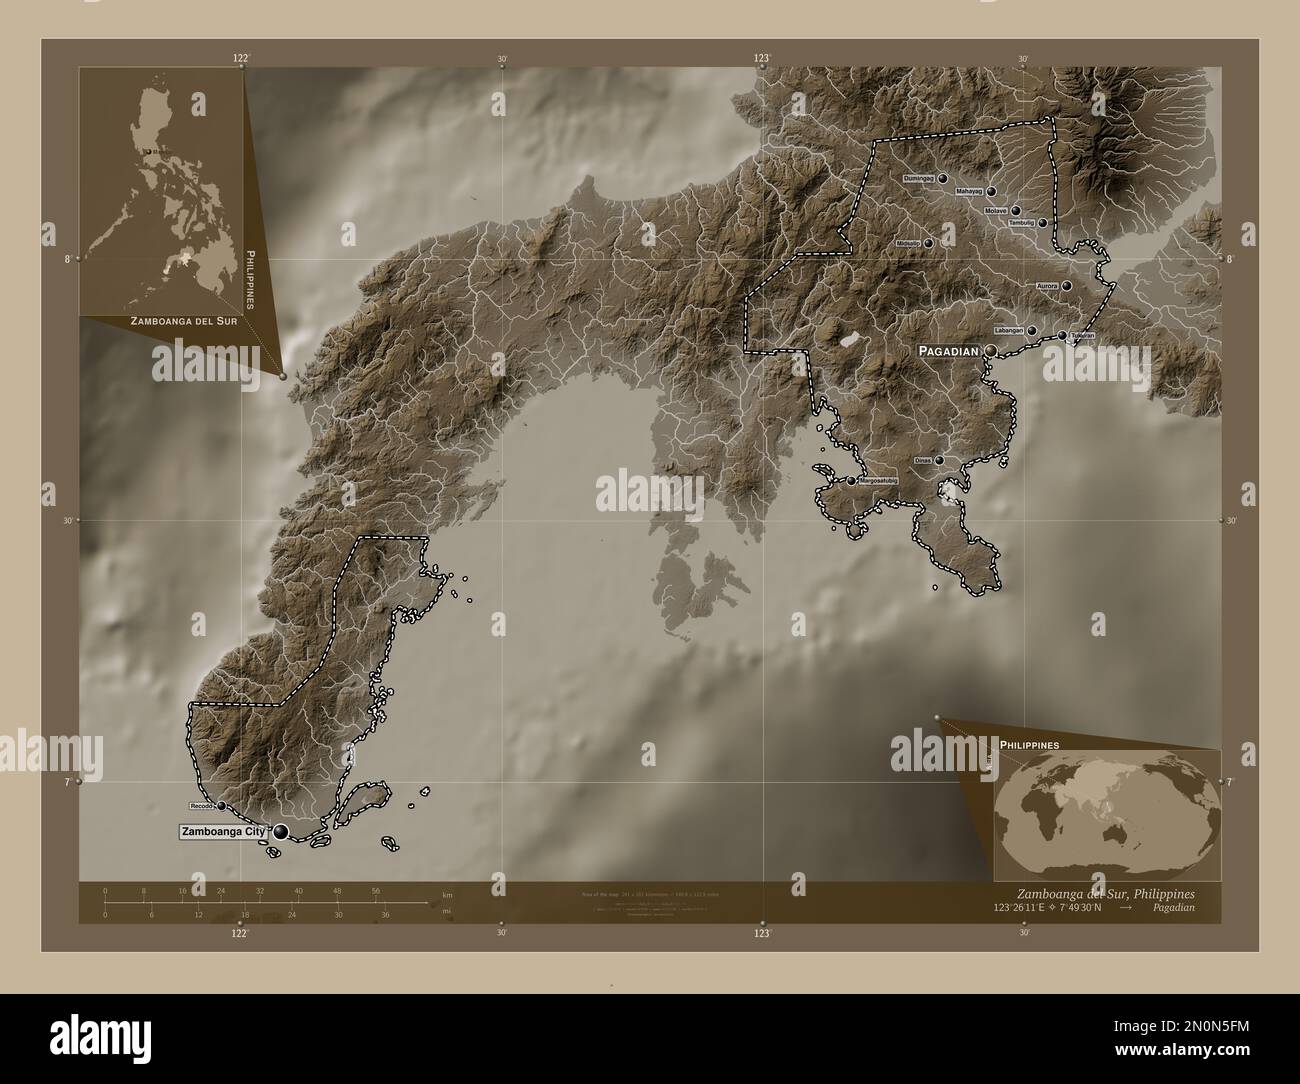 Zamboanga del Sur, province of Philippines. Elevation map colored in sepia tones with lakes and rivers. Locations and names of major cities of the reg Stock Photo